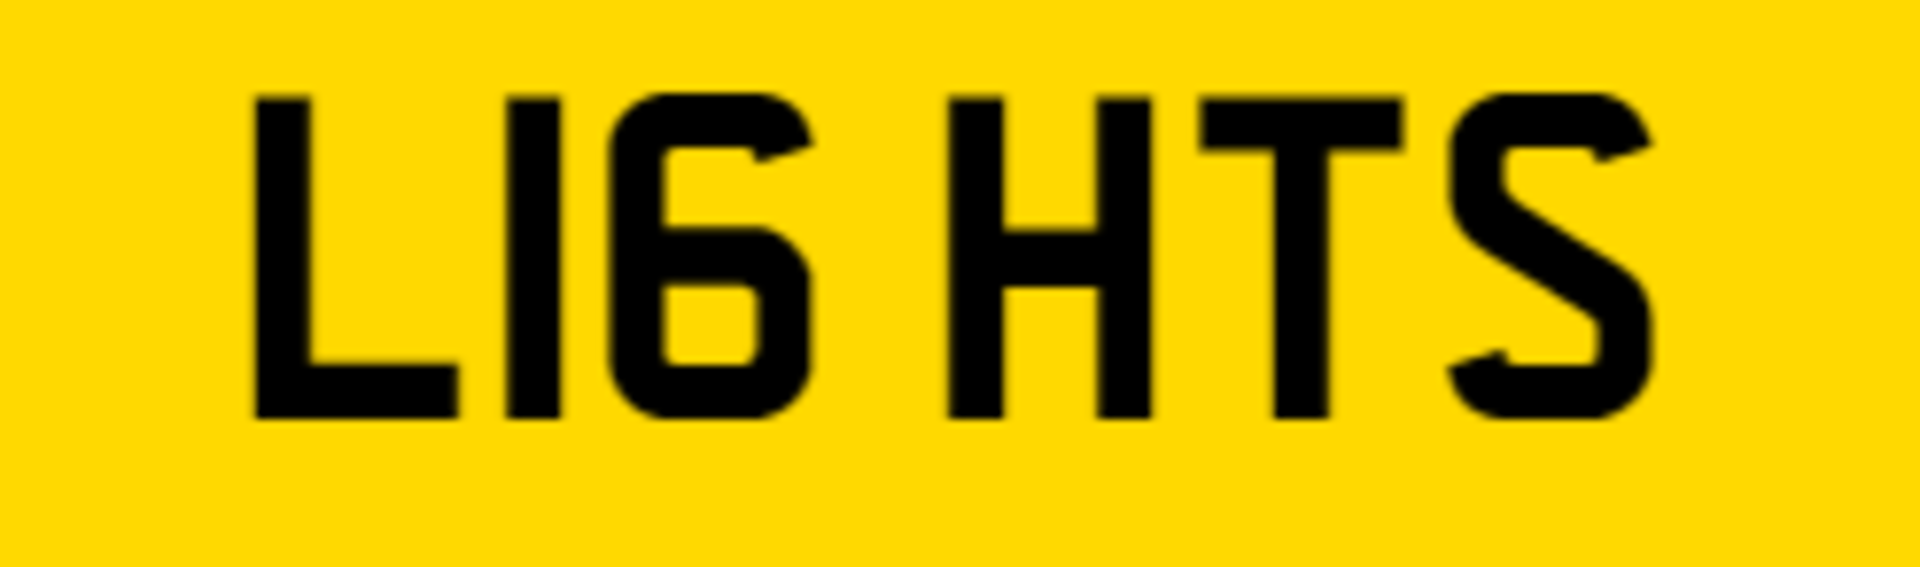 Cherished Registration Number - LI6 HTS (Certificate of Retention included) - Image 2 of 2